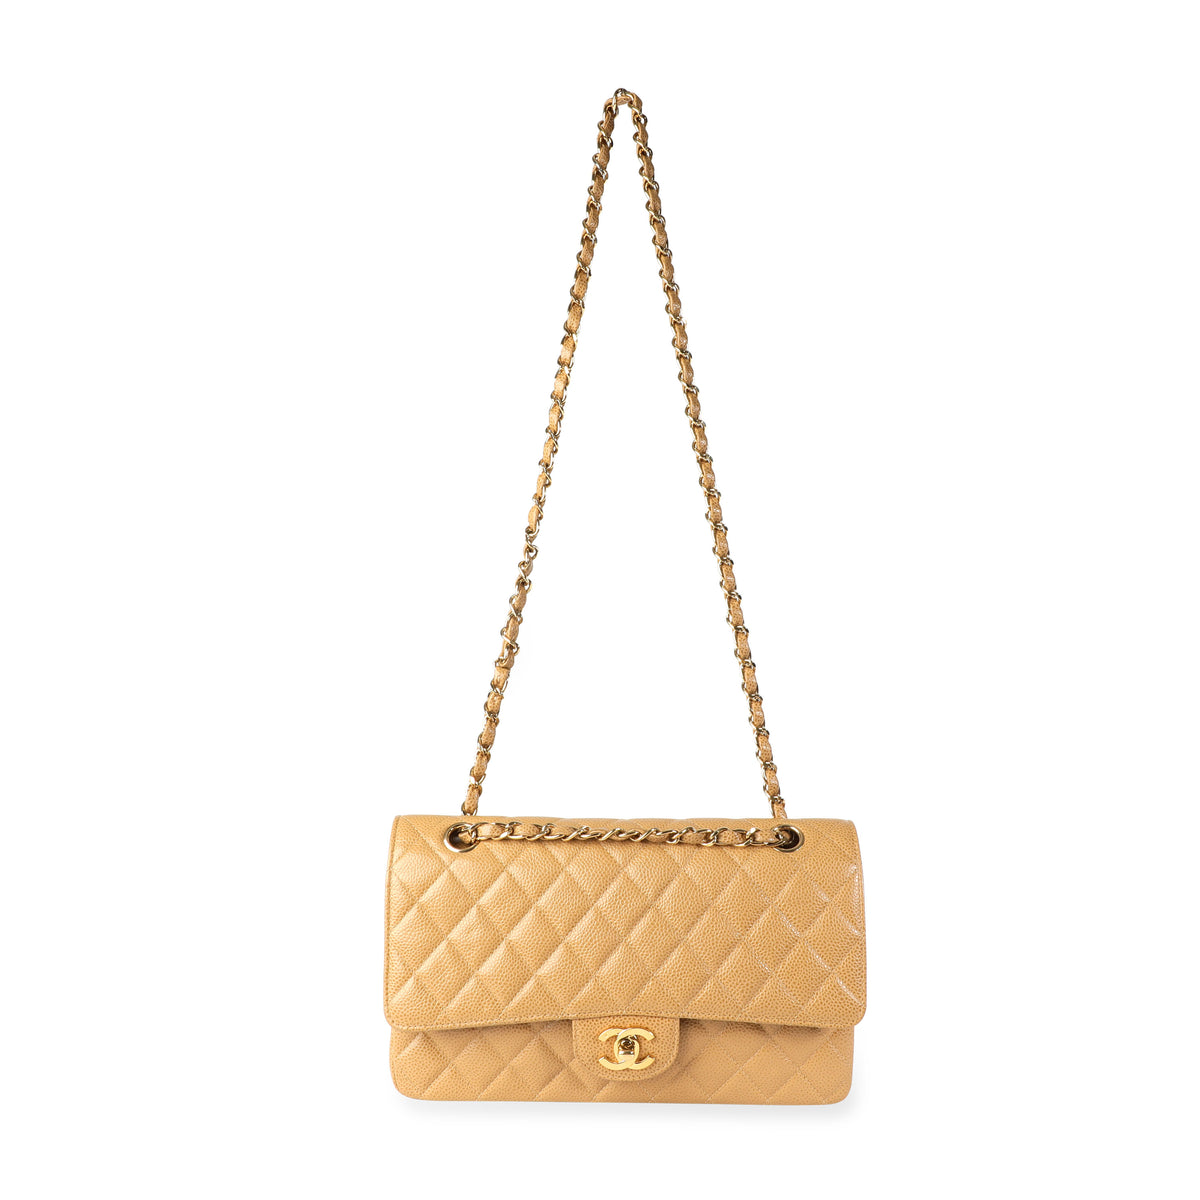 Chanel Tan Caviar Quilted Classic Medium Double Flap Bag